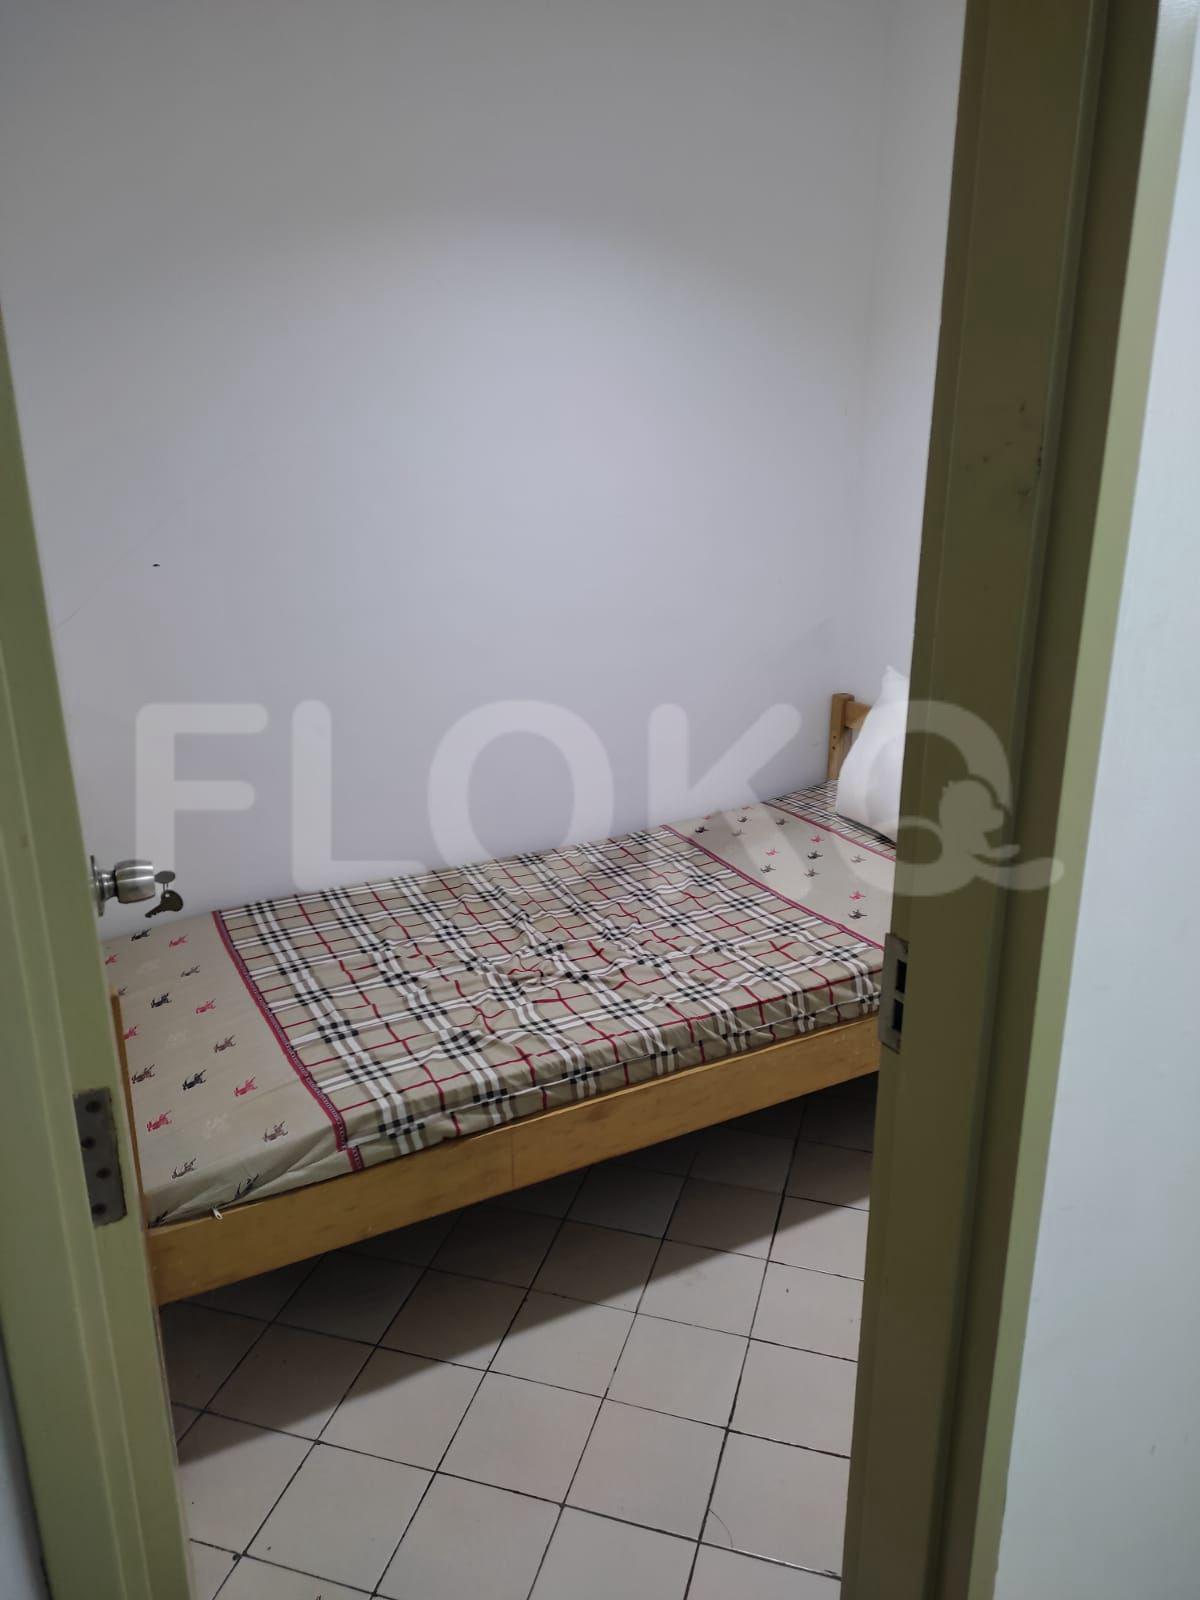 3 Bedroom on 3rd Floor fpo482 for Rent in Golfhill Terrace Apartment